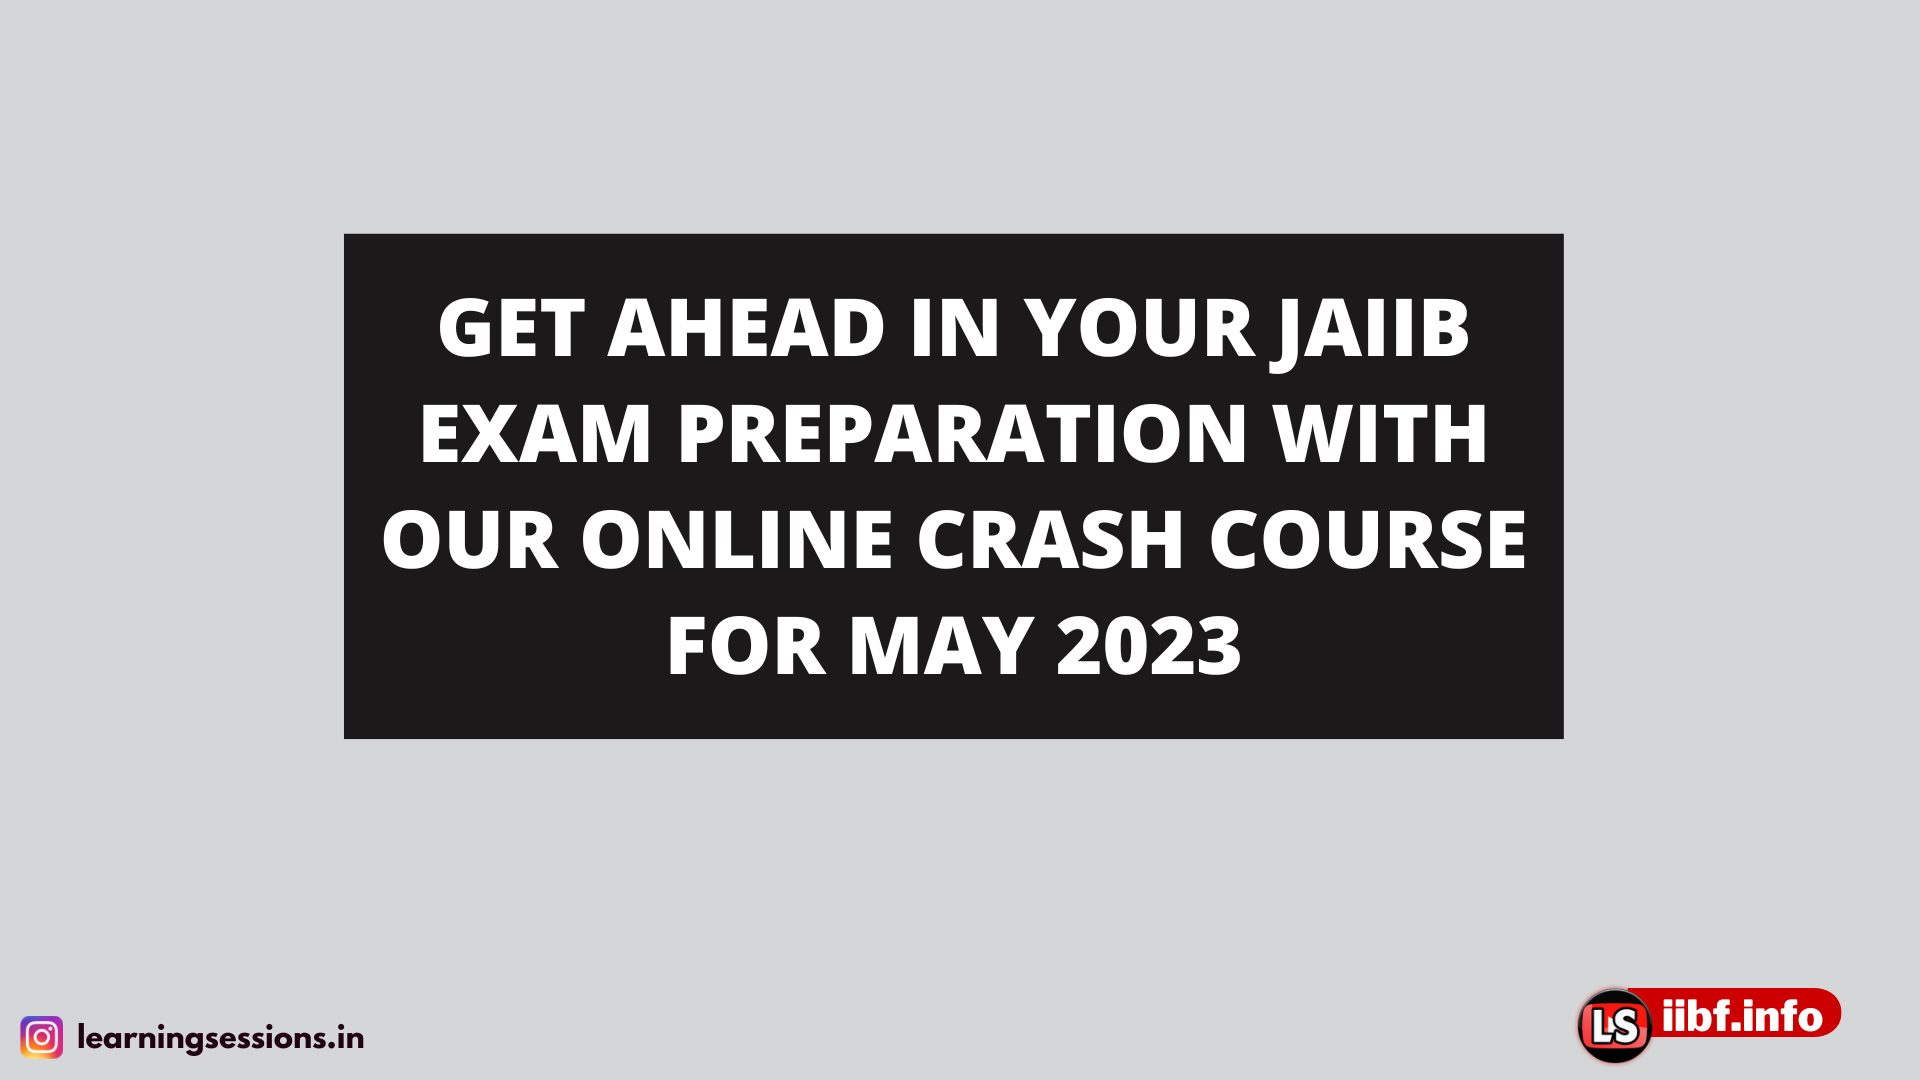 GET AHEAD IN YOUR JAIIB EXAM PREPARATION WITH OUR ONLINE CRASH COURSE FOR MAY 2023